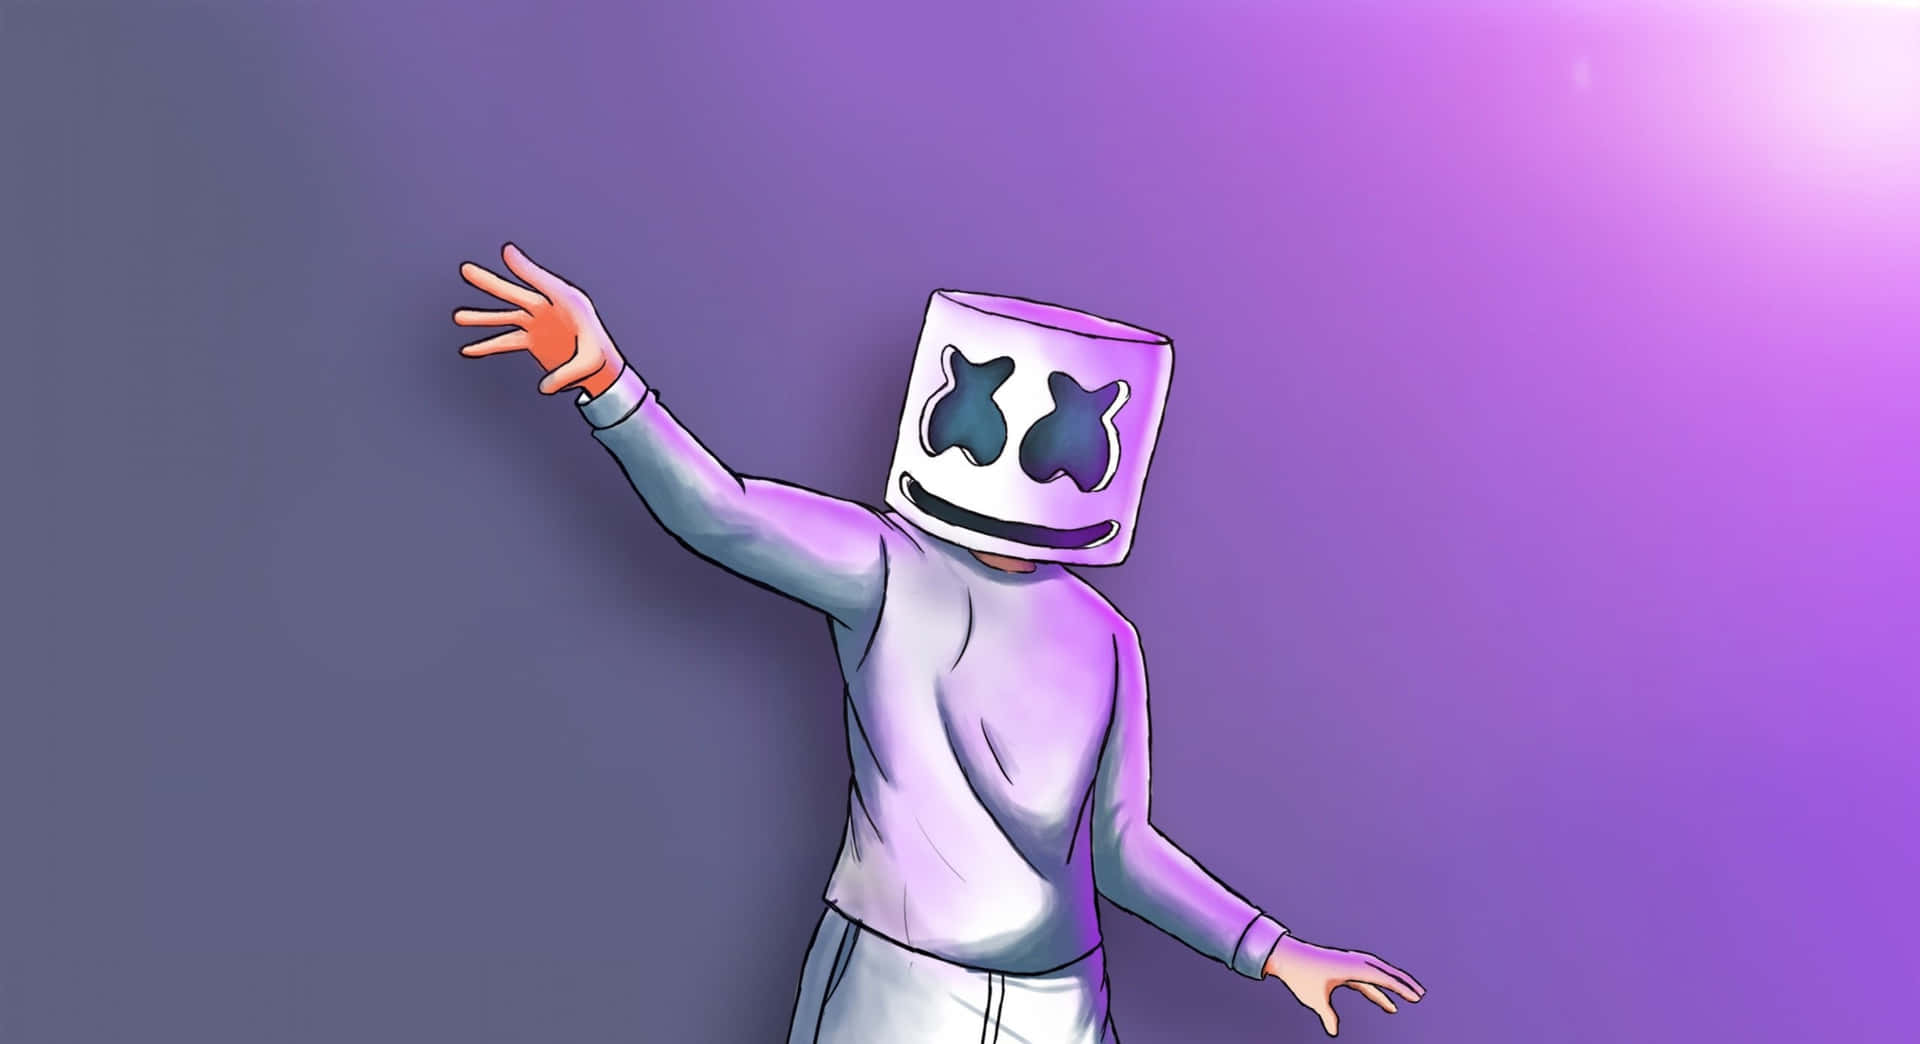 Music Producer Marshmello Lights Up The Crowd With His Positive Vibe